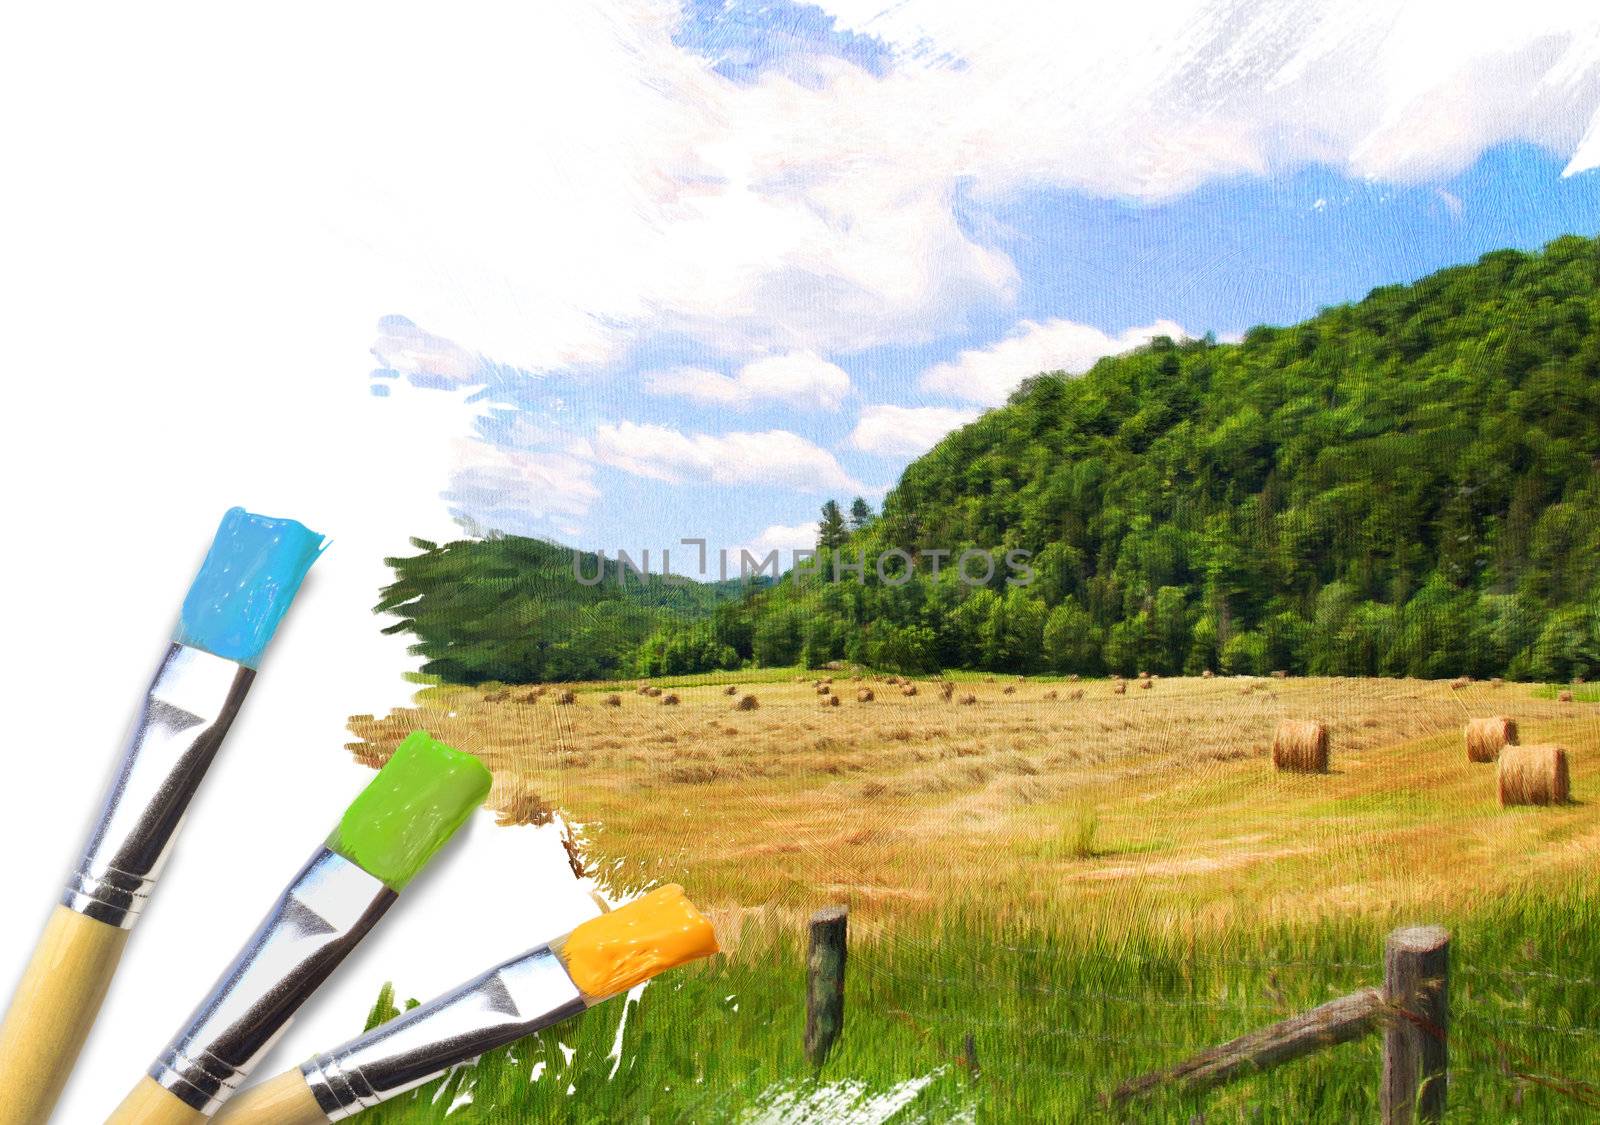 Artist brushes with a half finished painted canvas of rural landscape canvas